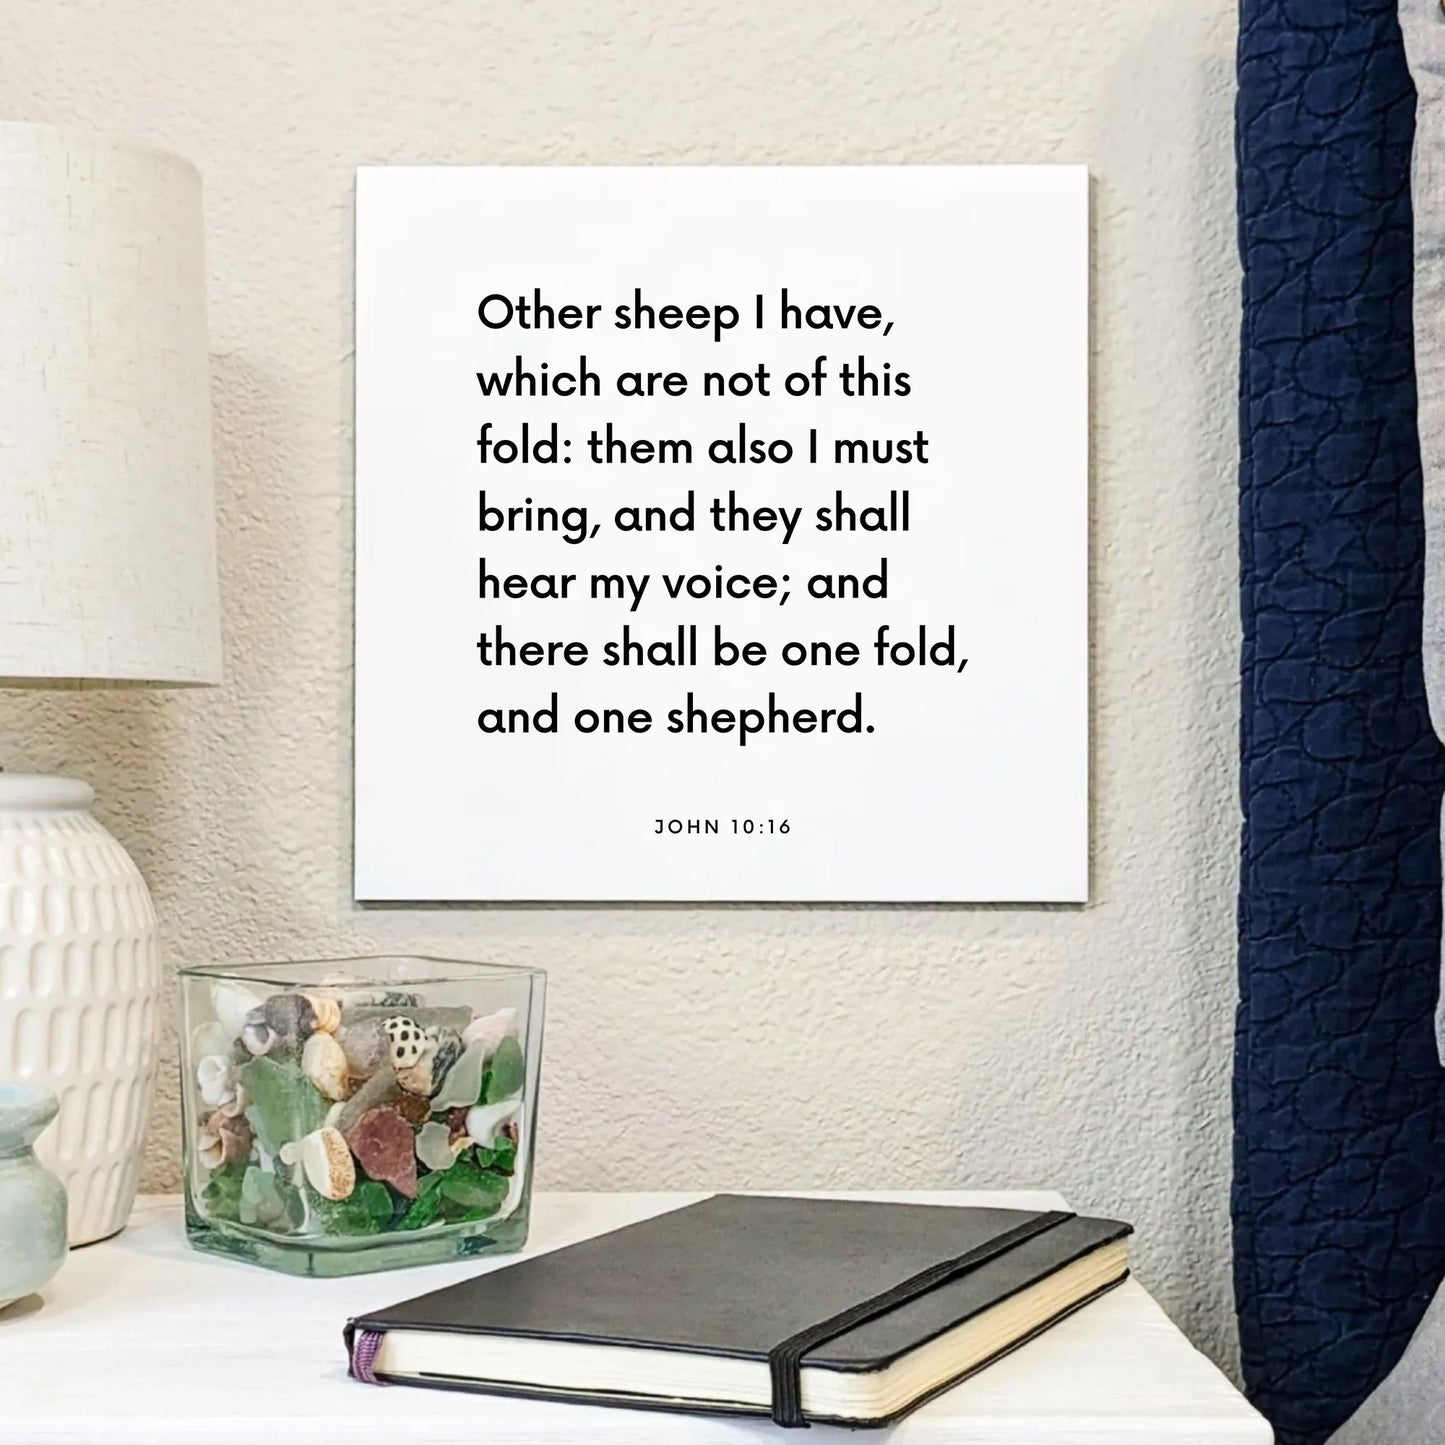 Bedside mouting of the scripture tile for John 10:16 - "Other sheep I have, which are not of this fold"